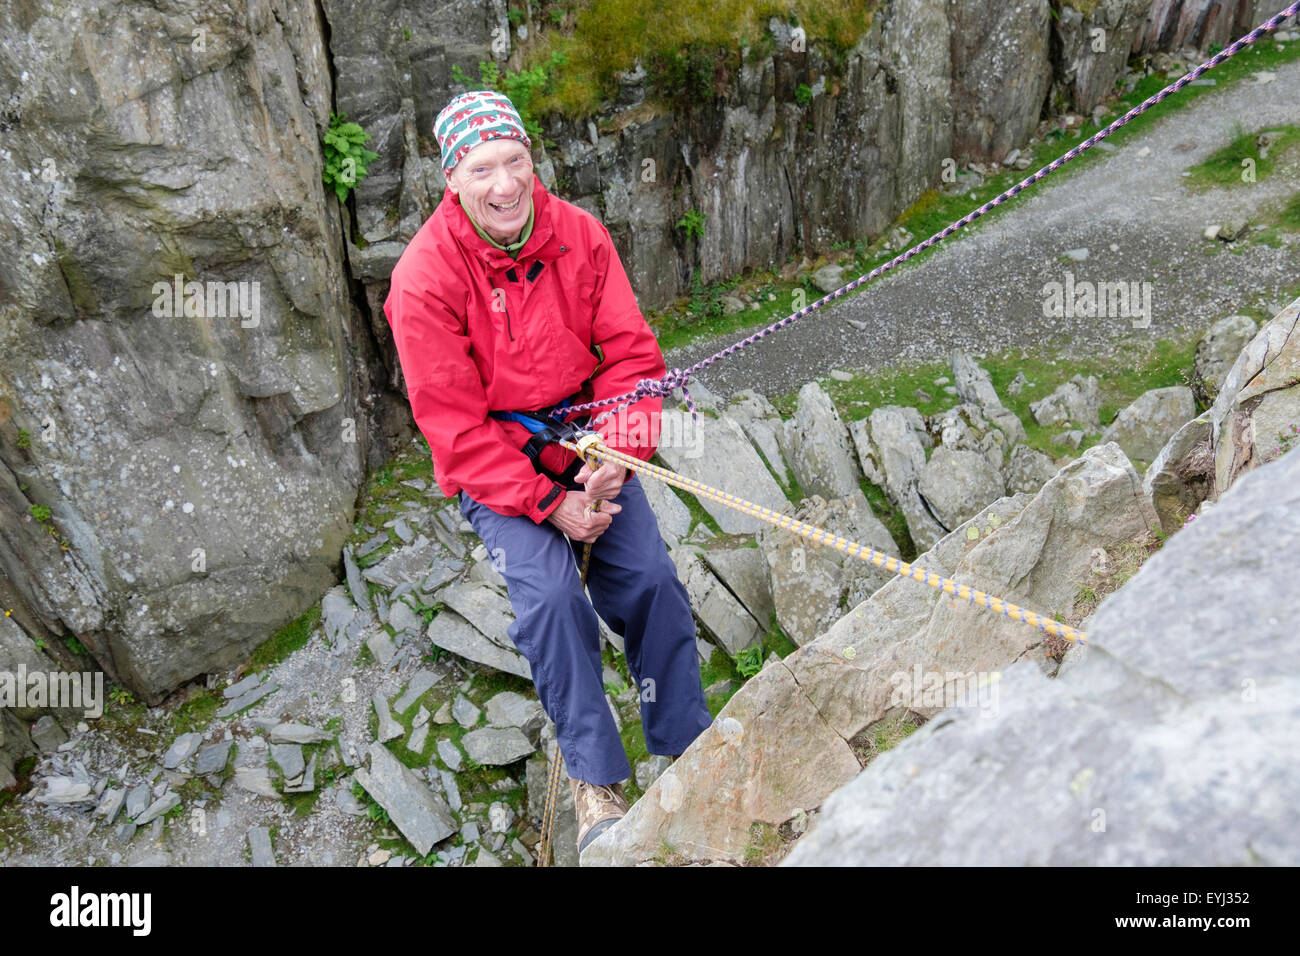 Happy active senior man having fun abseiling with a safety rope on a steep rockface for wellbeing outdoors. North Wales, UK, Britain Stock Photo